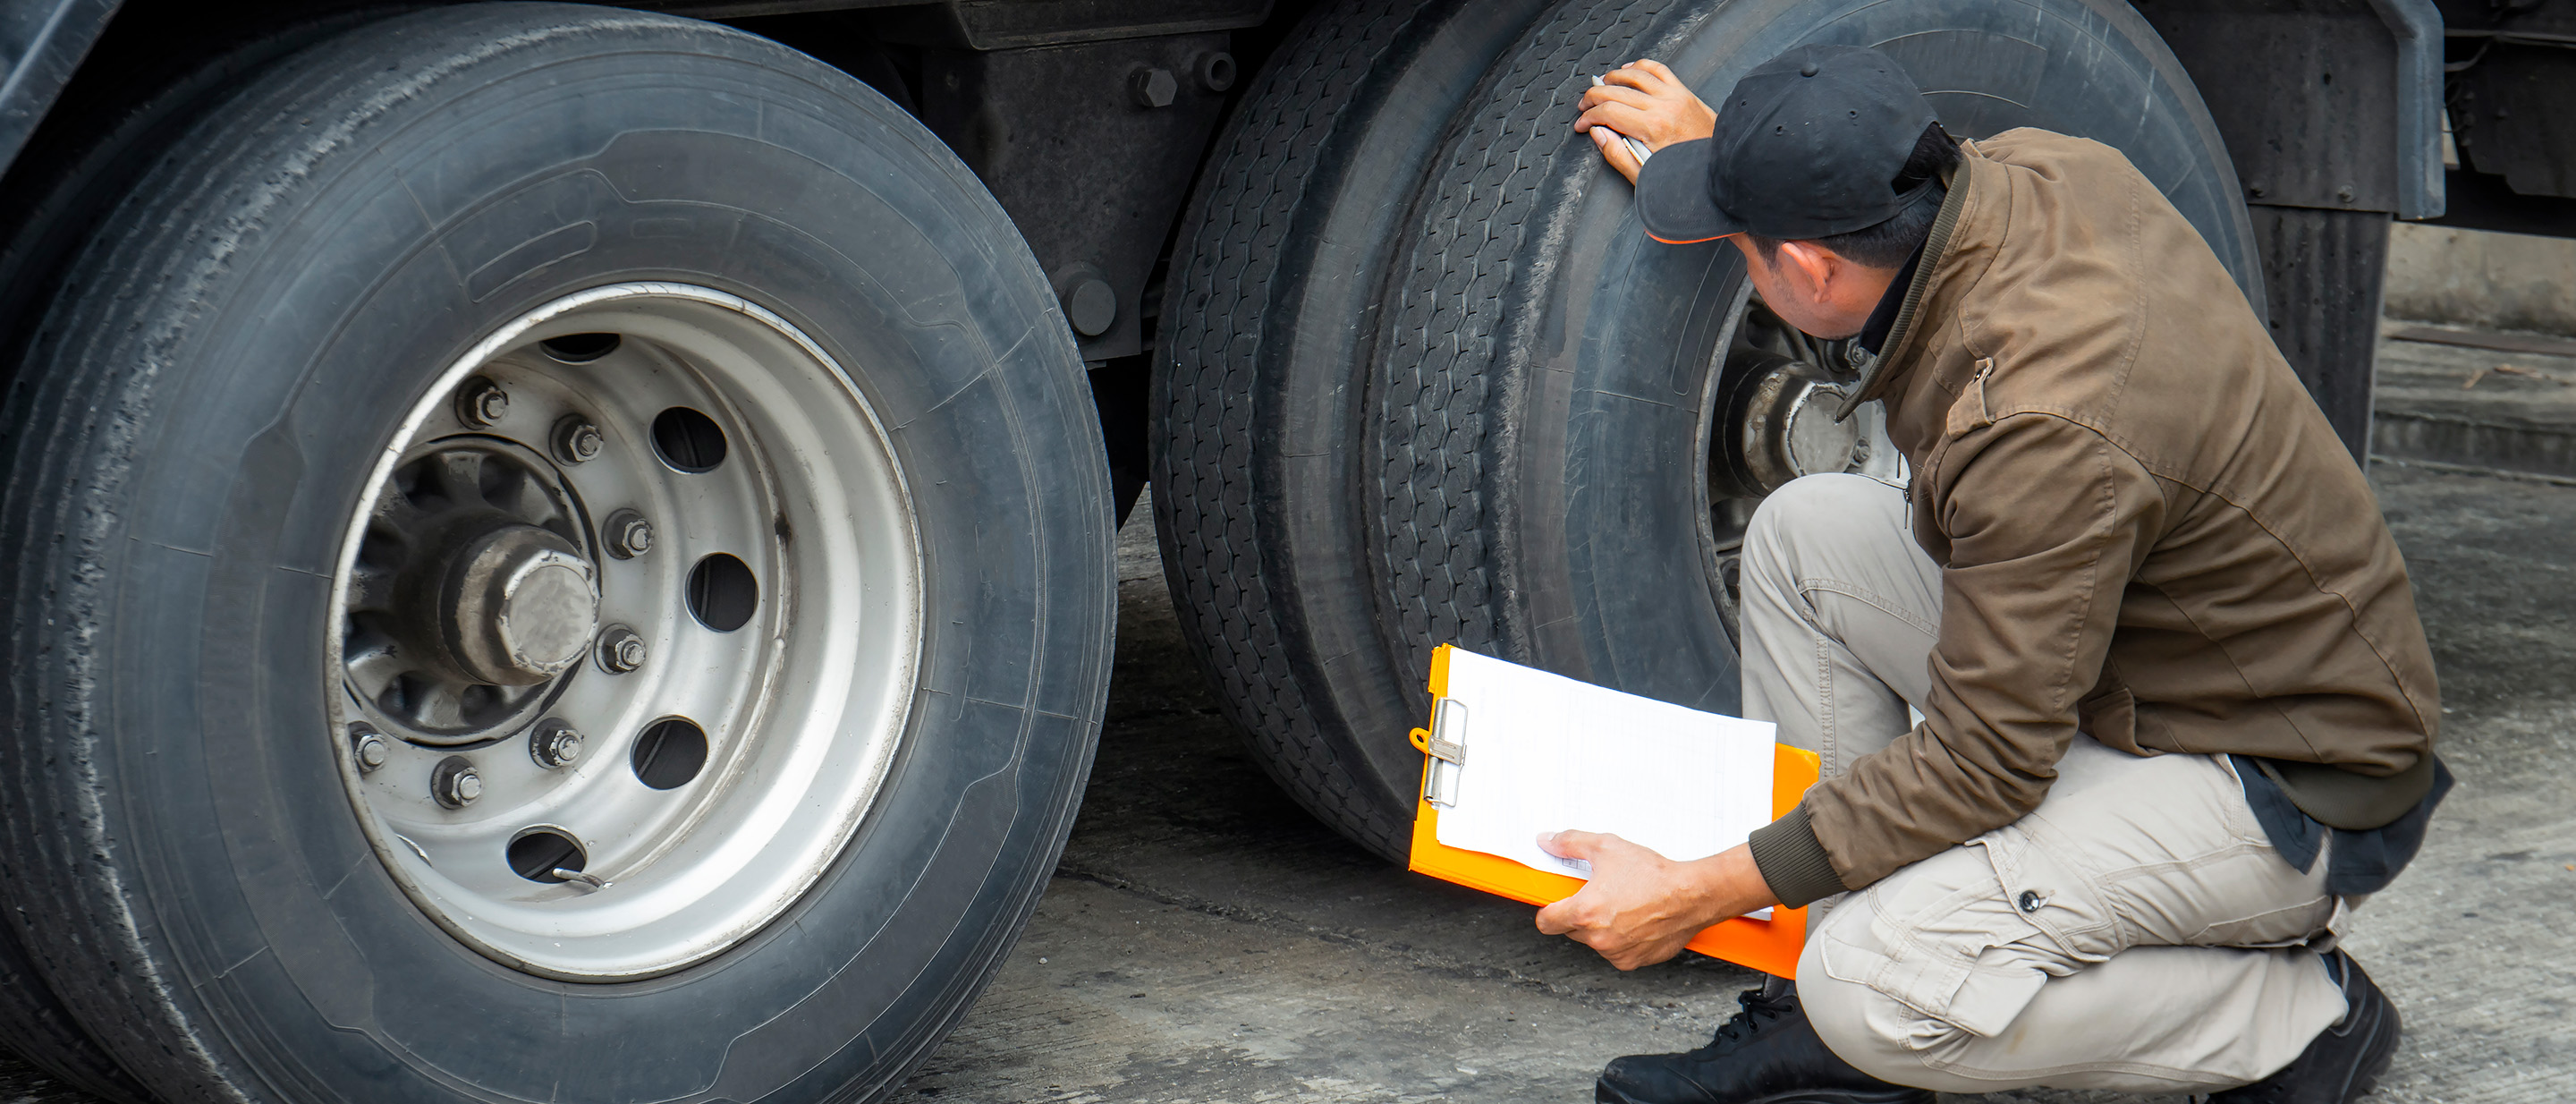 Male truck driver holding a clipboard stooping down for a safety check on truck tires.